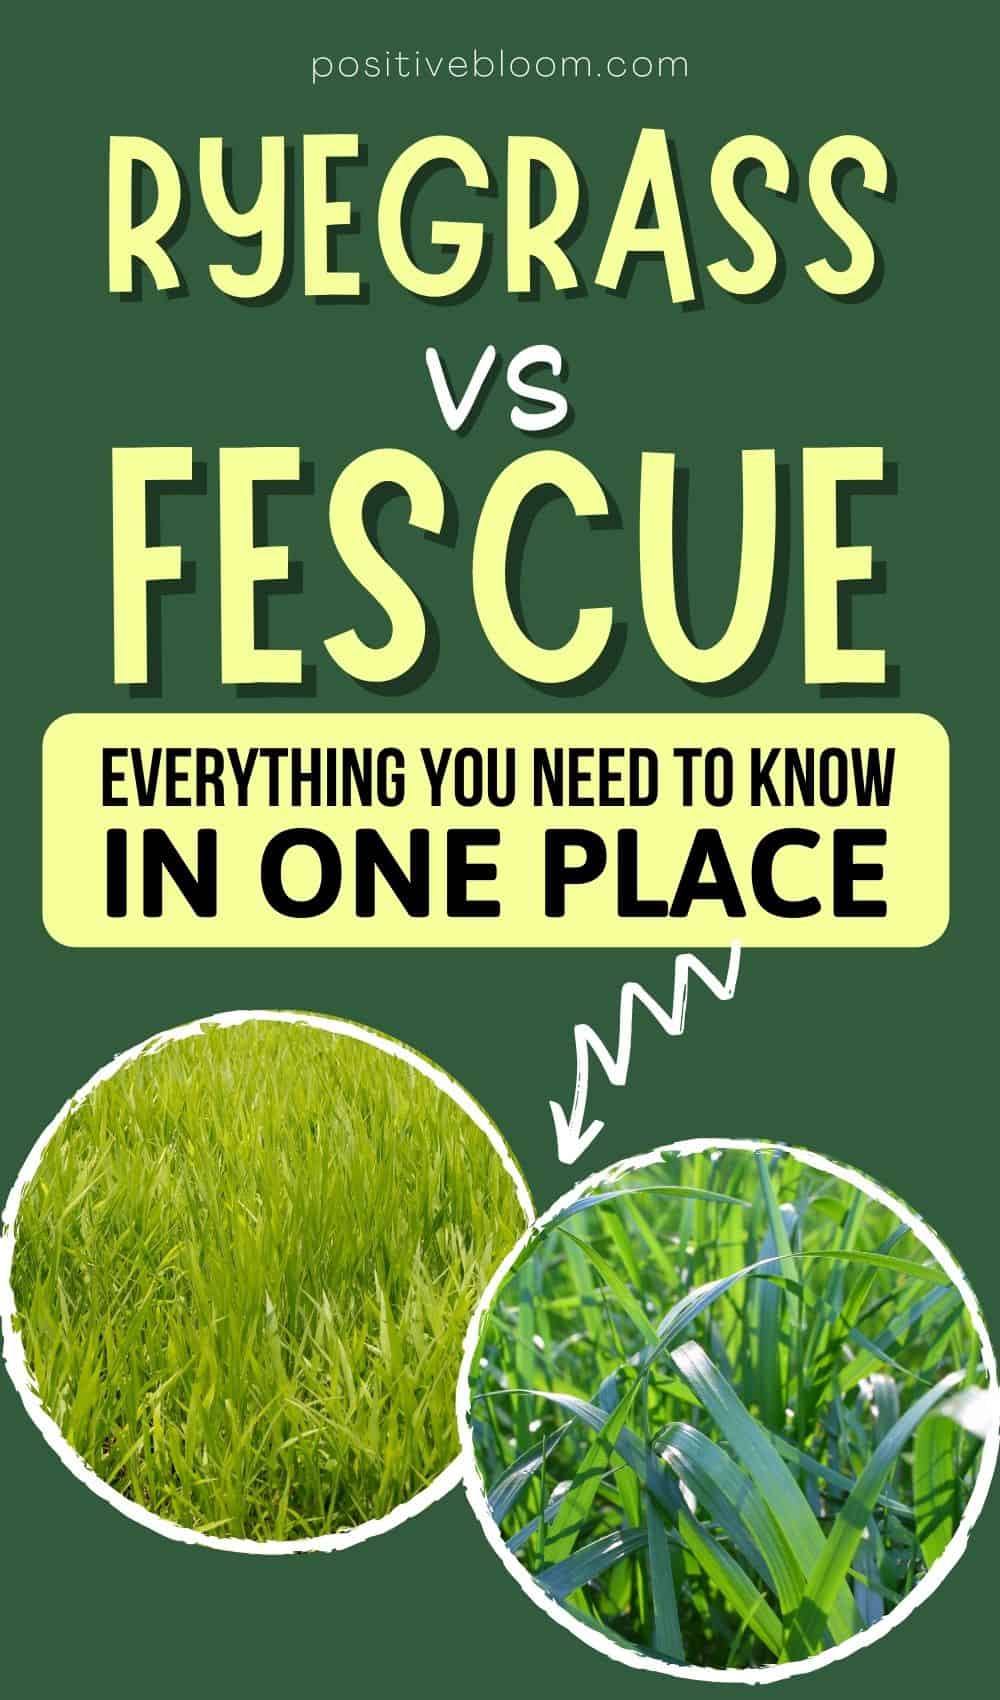 Ryegrass vs Fescue Everything You Need To Know In One Place